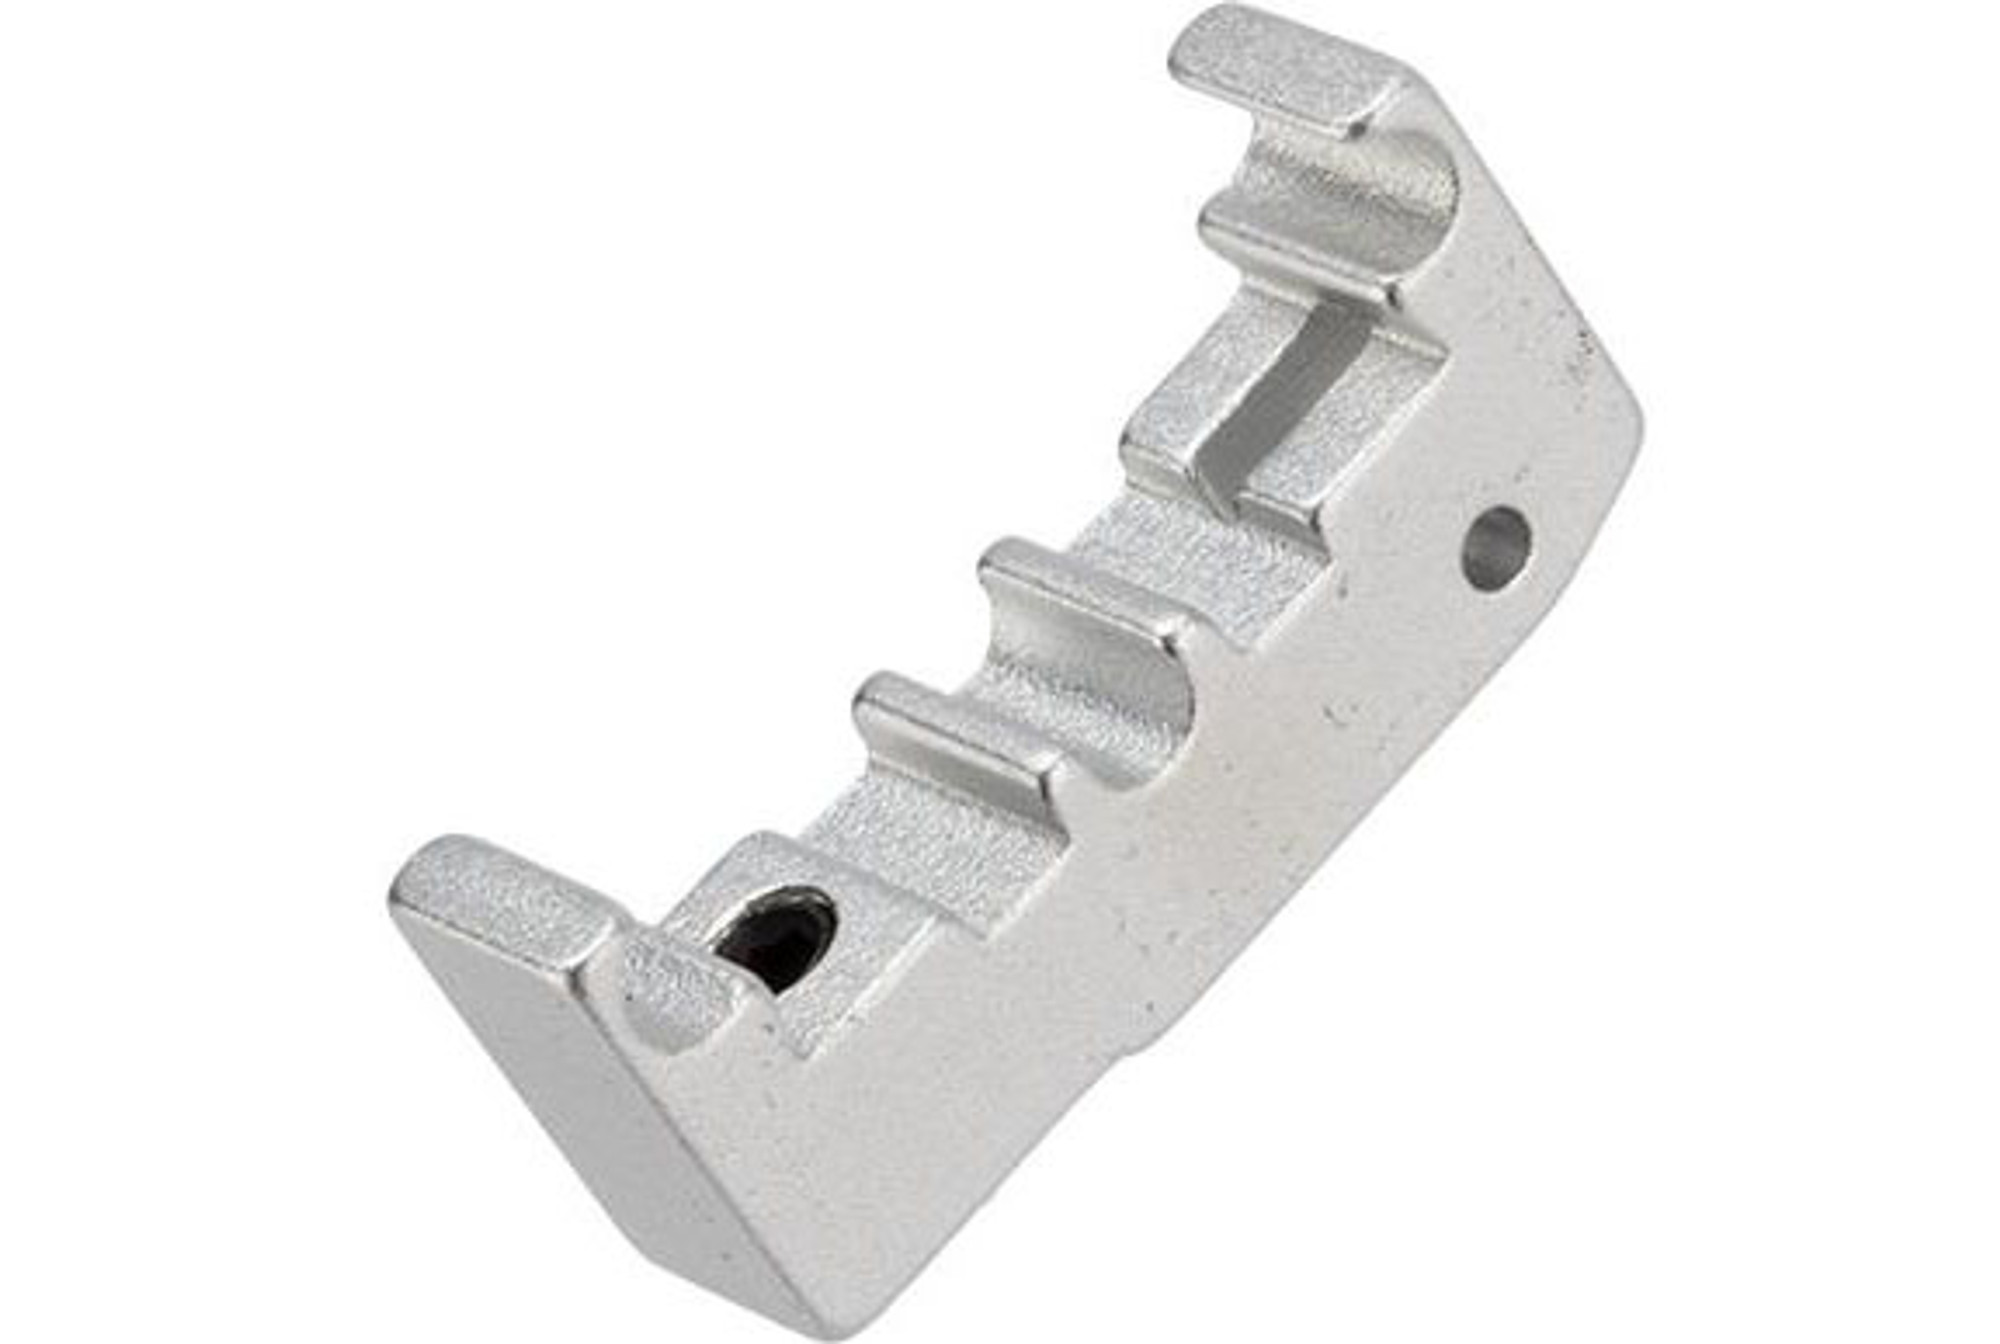 Airsoft Masterpiece Aluminum Puzzle Trigger - Base (Color: Silver)